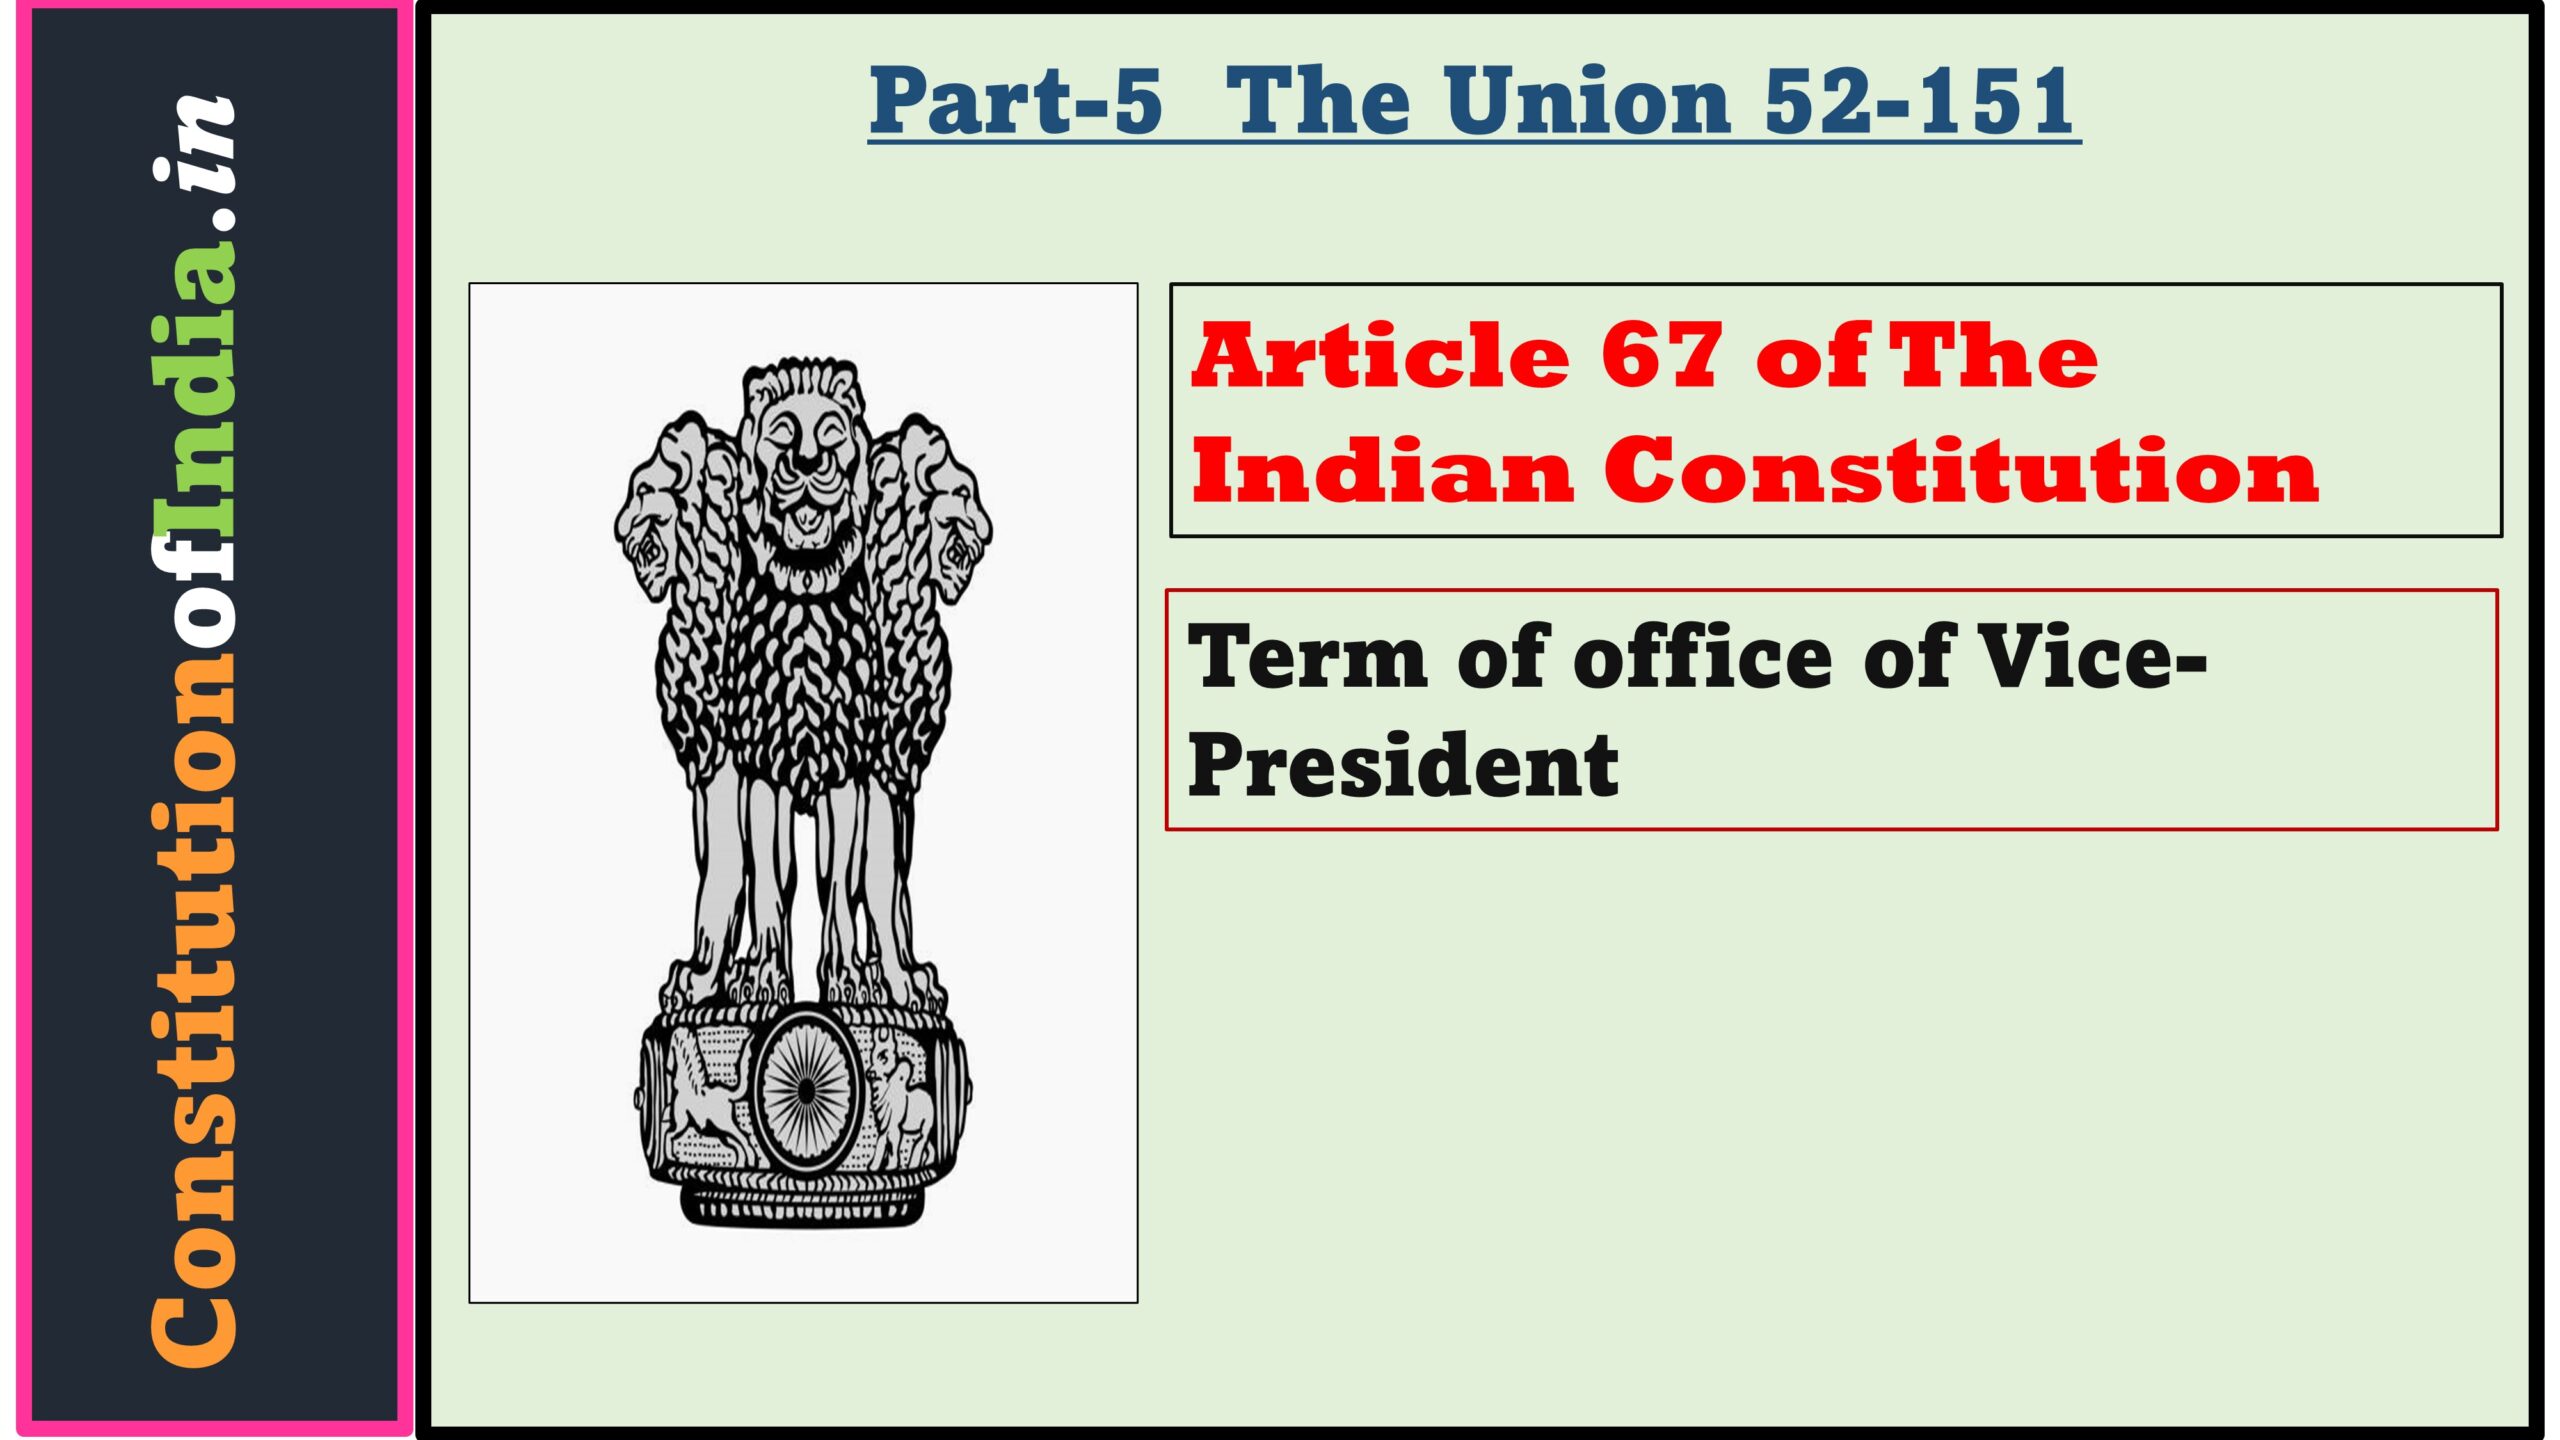 Article 67 of Indian Constitution: Term of office of Vice-President.